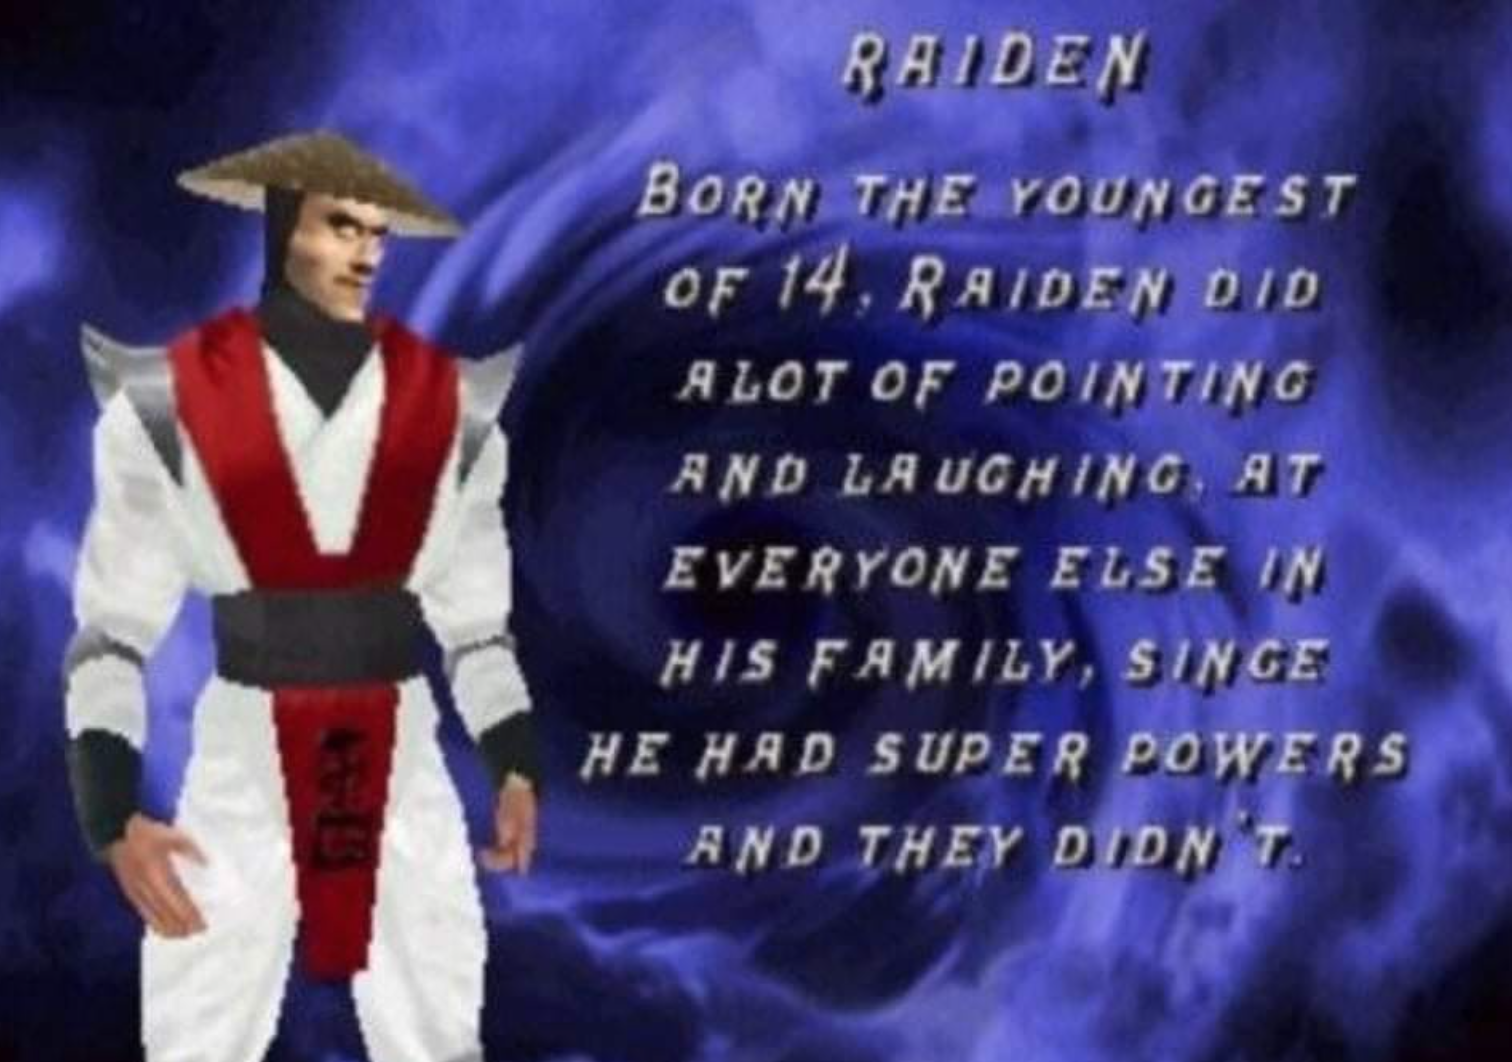 funny gaming memes - raiden backstory - Raiden Born The Youngest Of 14. Raiden Did A Lot Of Pointing And Laughing, At Everyone Else In His Family, Singe He Had Super Powers And They Didn T.